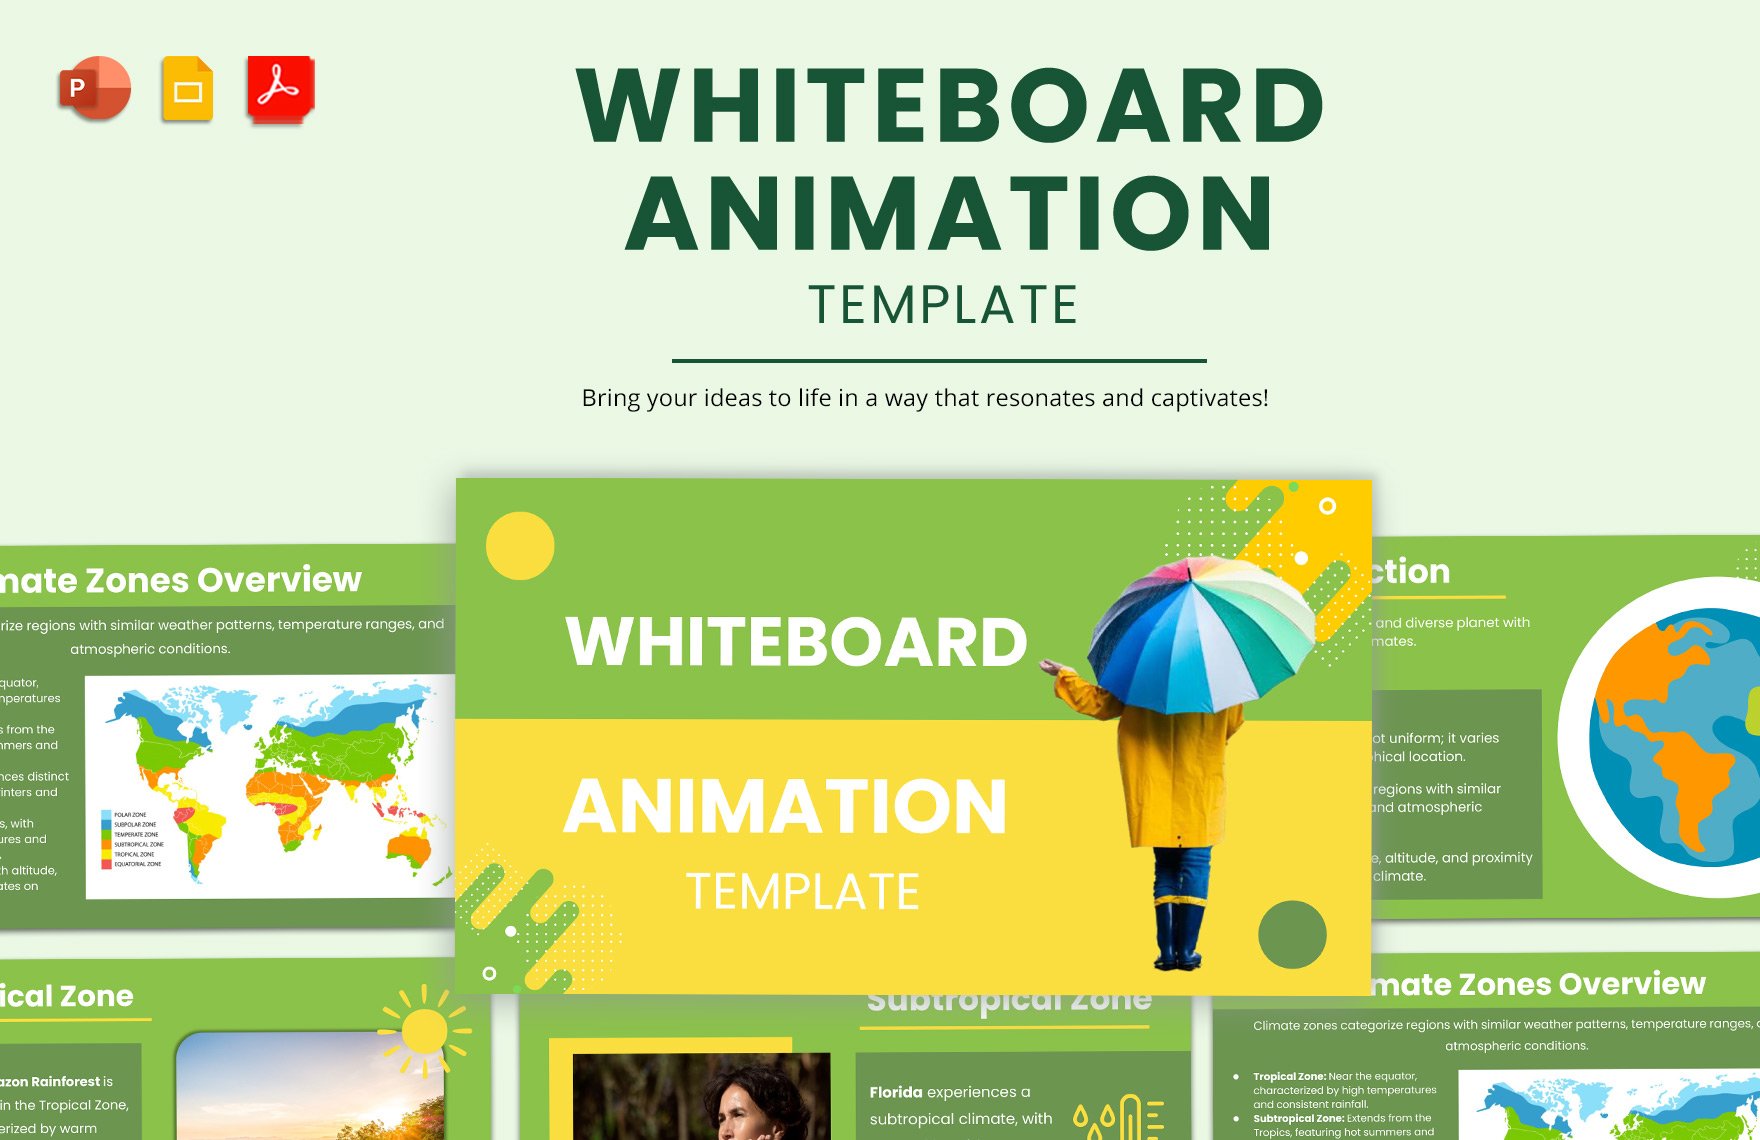 Whiteboard Animation Template